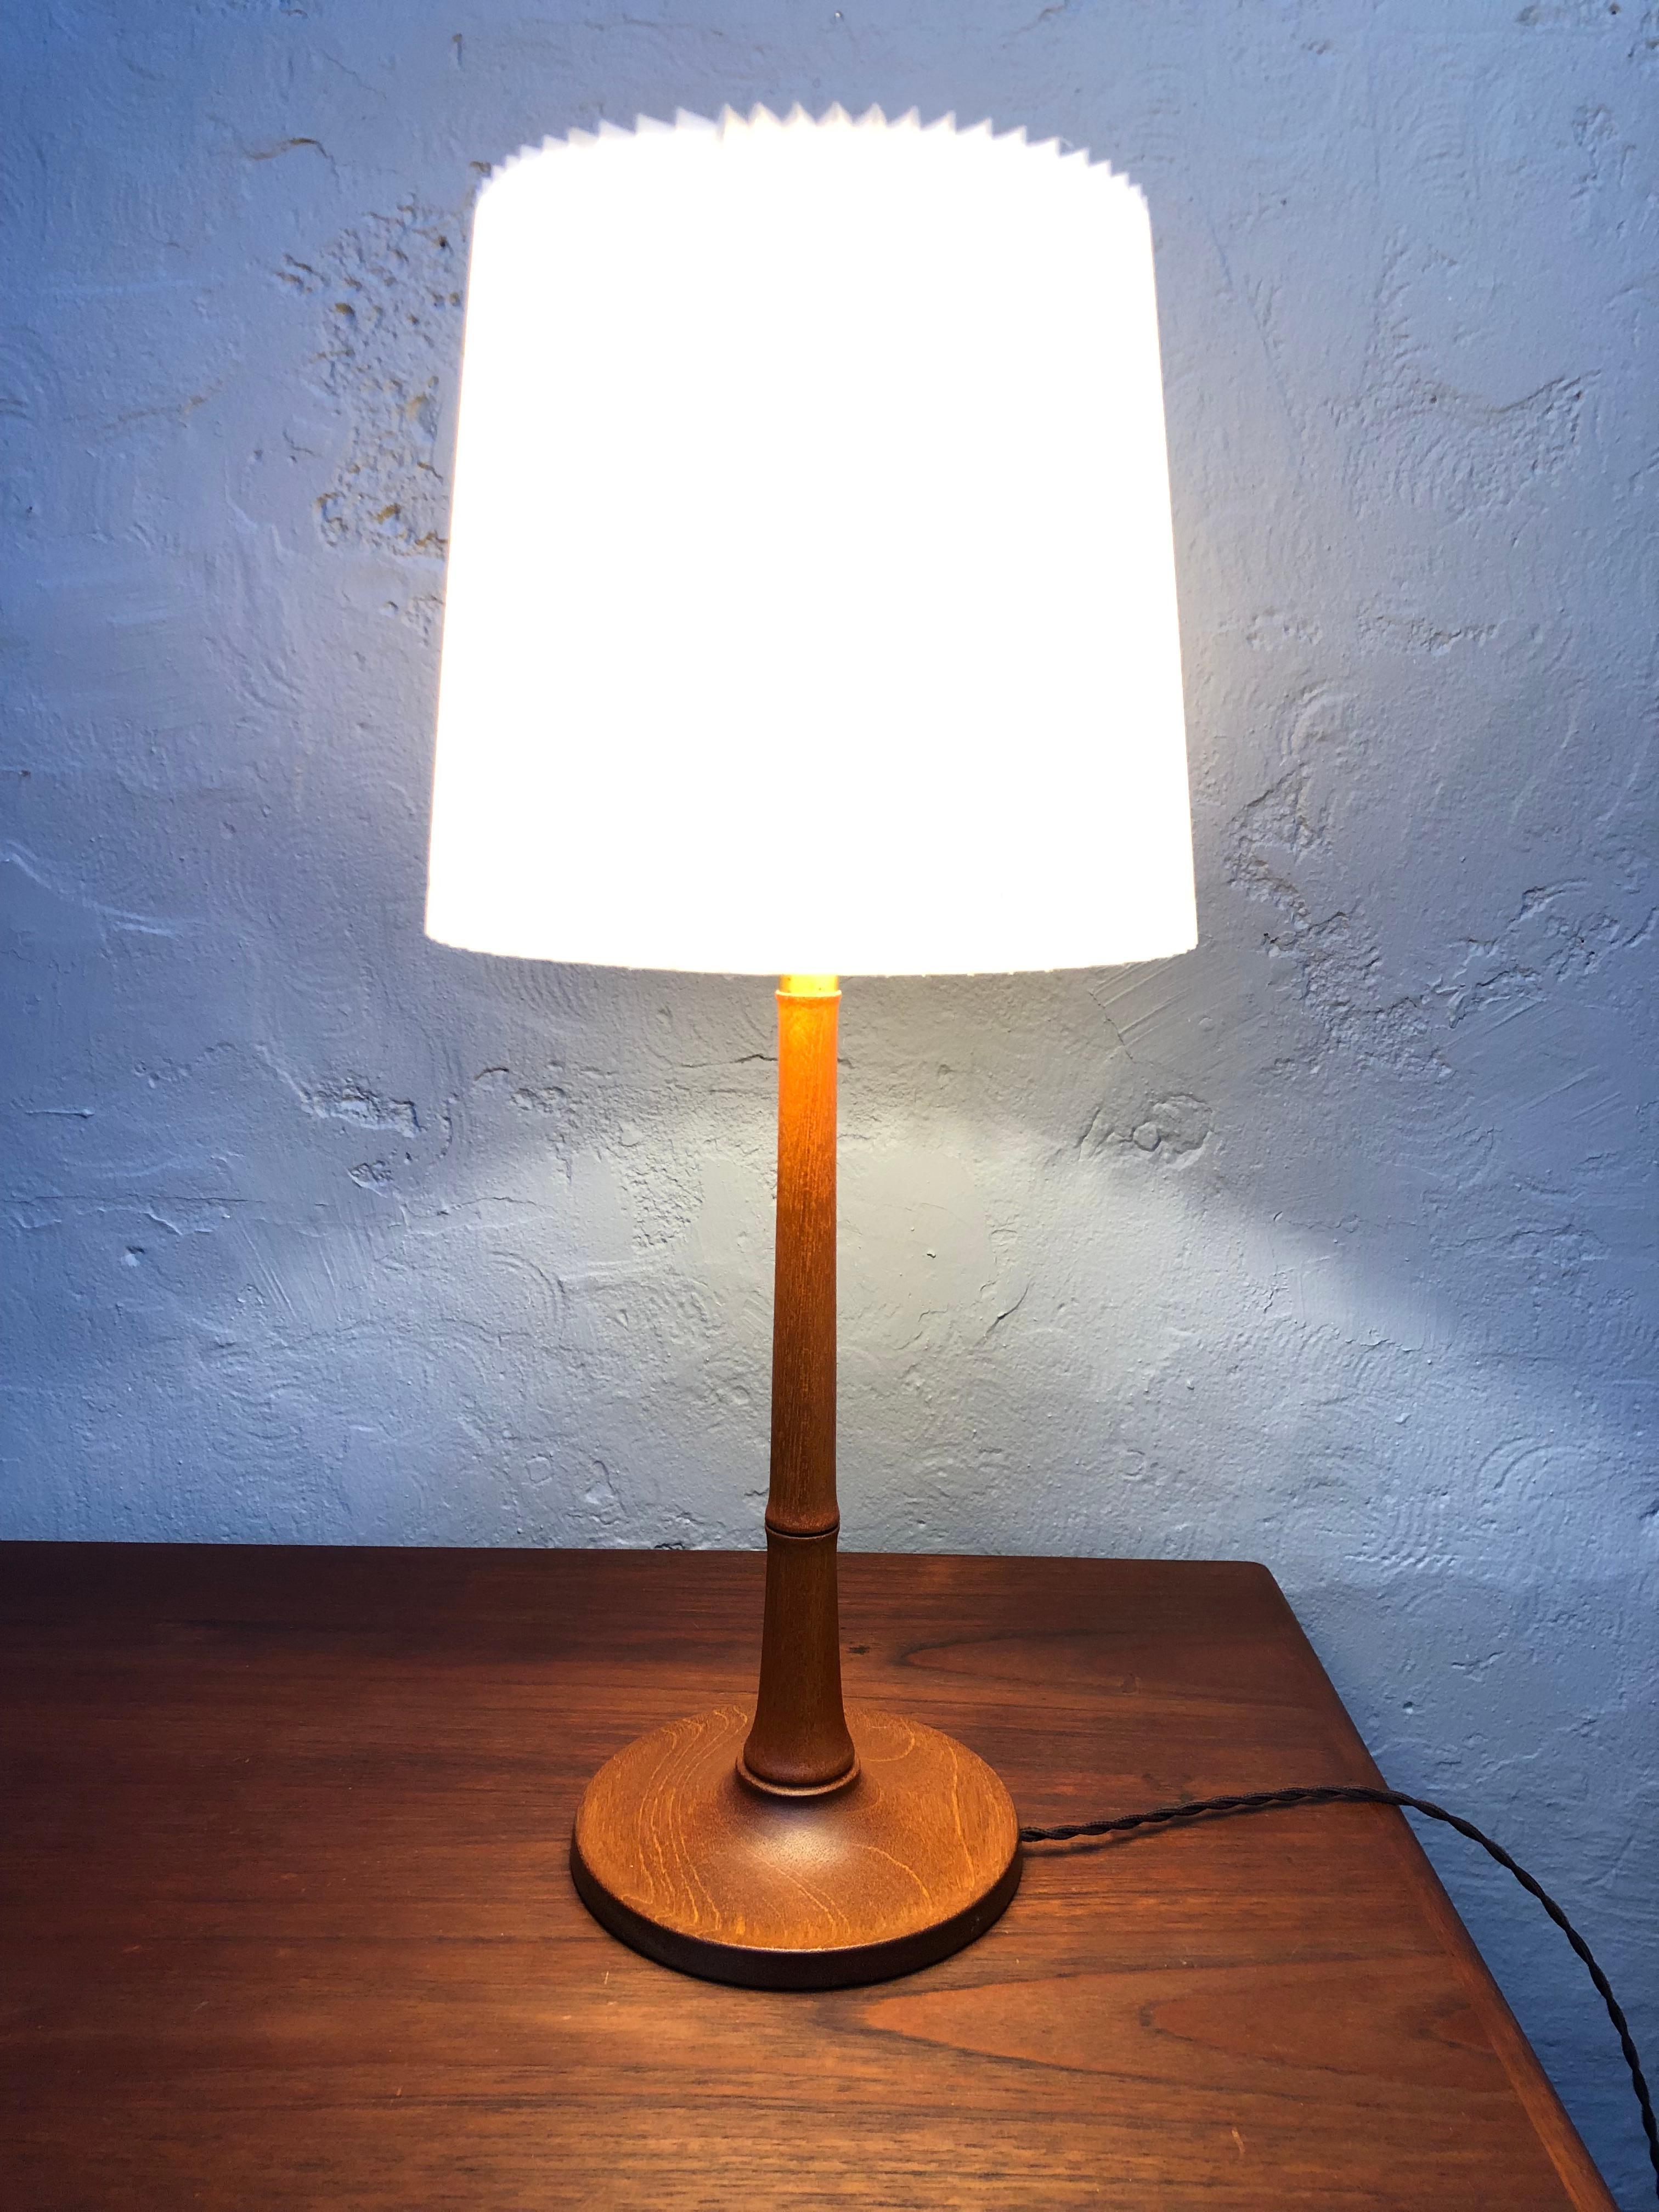 Mid-Century Modern A Vintage Teak Table Lamp by Esben Klint for Le Klint from the 1940s For Sale